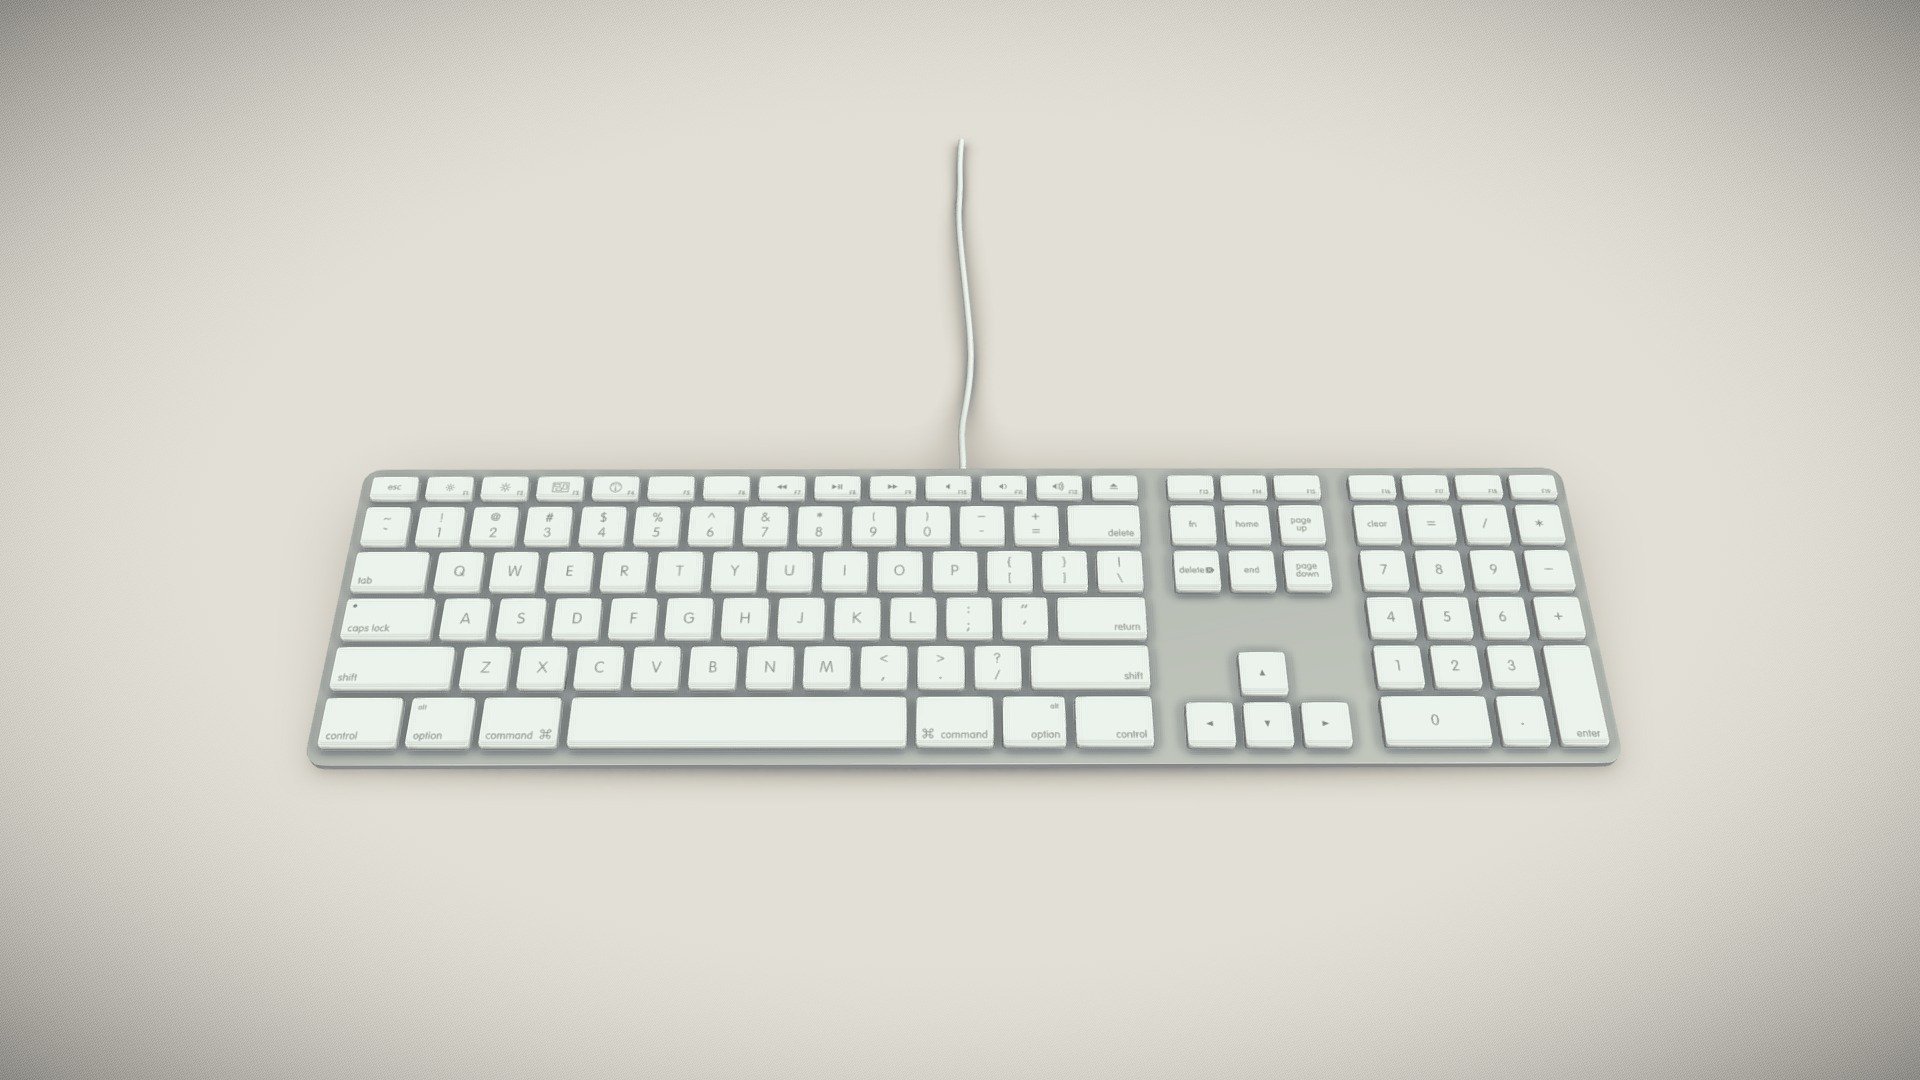 •         Let me present to you high-quality middle-poly 3D model Apple Keyboard MB110. Modeling was made with ortho-photos of real keyboard that is why all details of design are recreated most authentically.

•        The model uses 4 simple colored materials and 1 materials with 1 texture used as mask for sign. 

•        The total of the main textures is 1. Resolution of texture is 4096 pixels square aspect ratio in .png format. Also there is original texture file .PSD format in separate archive.

•   Polygon count of the model is – 10462.

•   The model has correct dimensions in real-world scale. All parts grouped and named correctly.

•   To use the model in other 3D programs there are scenes saved in formats .fbx, .obj, .DAE, .max (2010 version).

Note: If you see some artifacts on the textures, it means compression works in the Viewer. We recommend setting HD quality for textures. But anyway, original textures have no artifacts 3d model